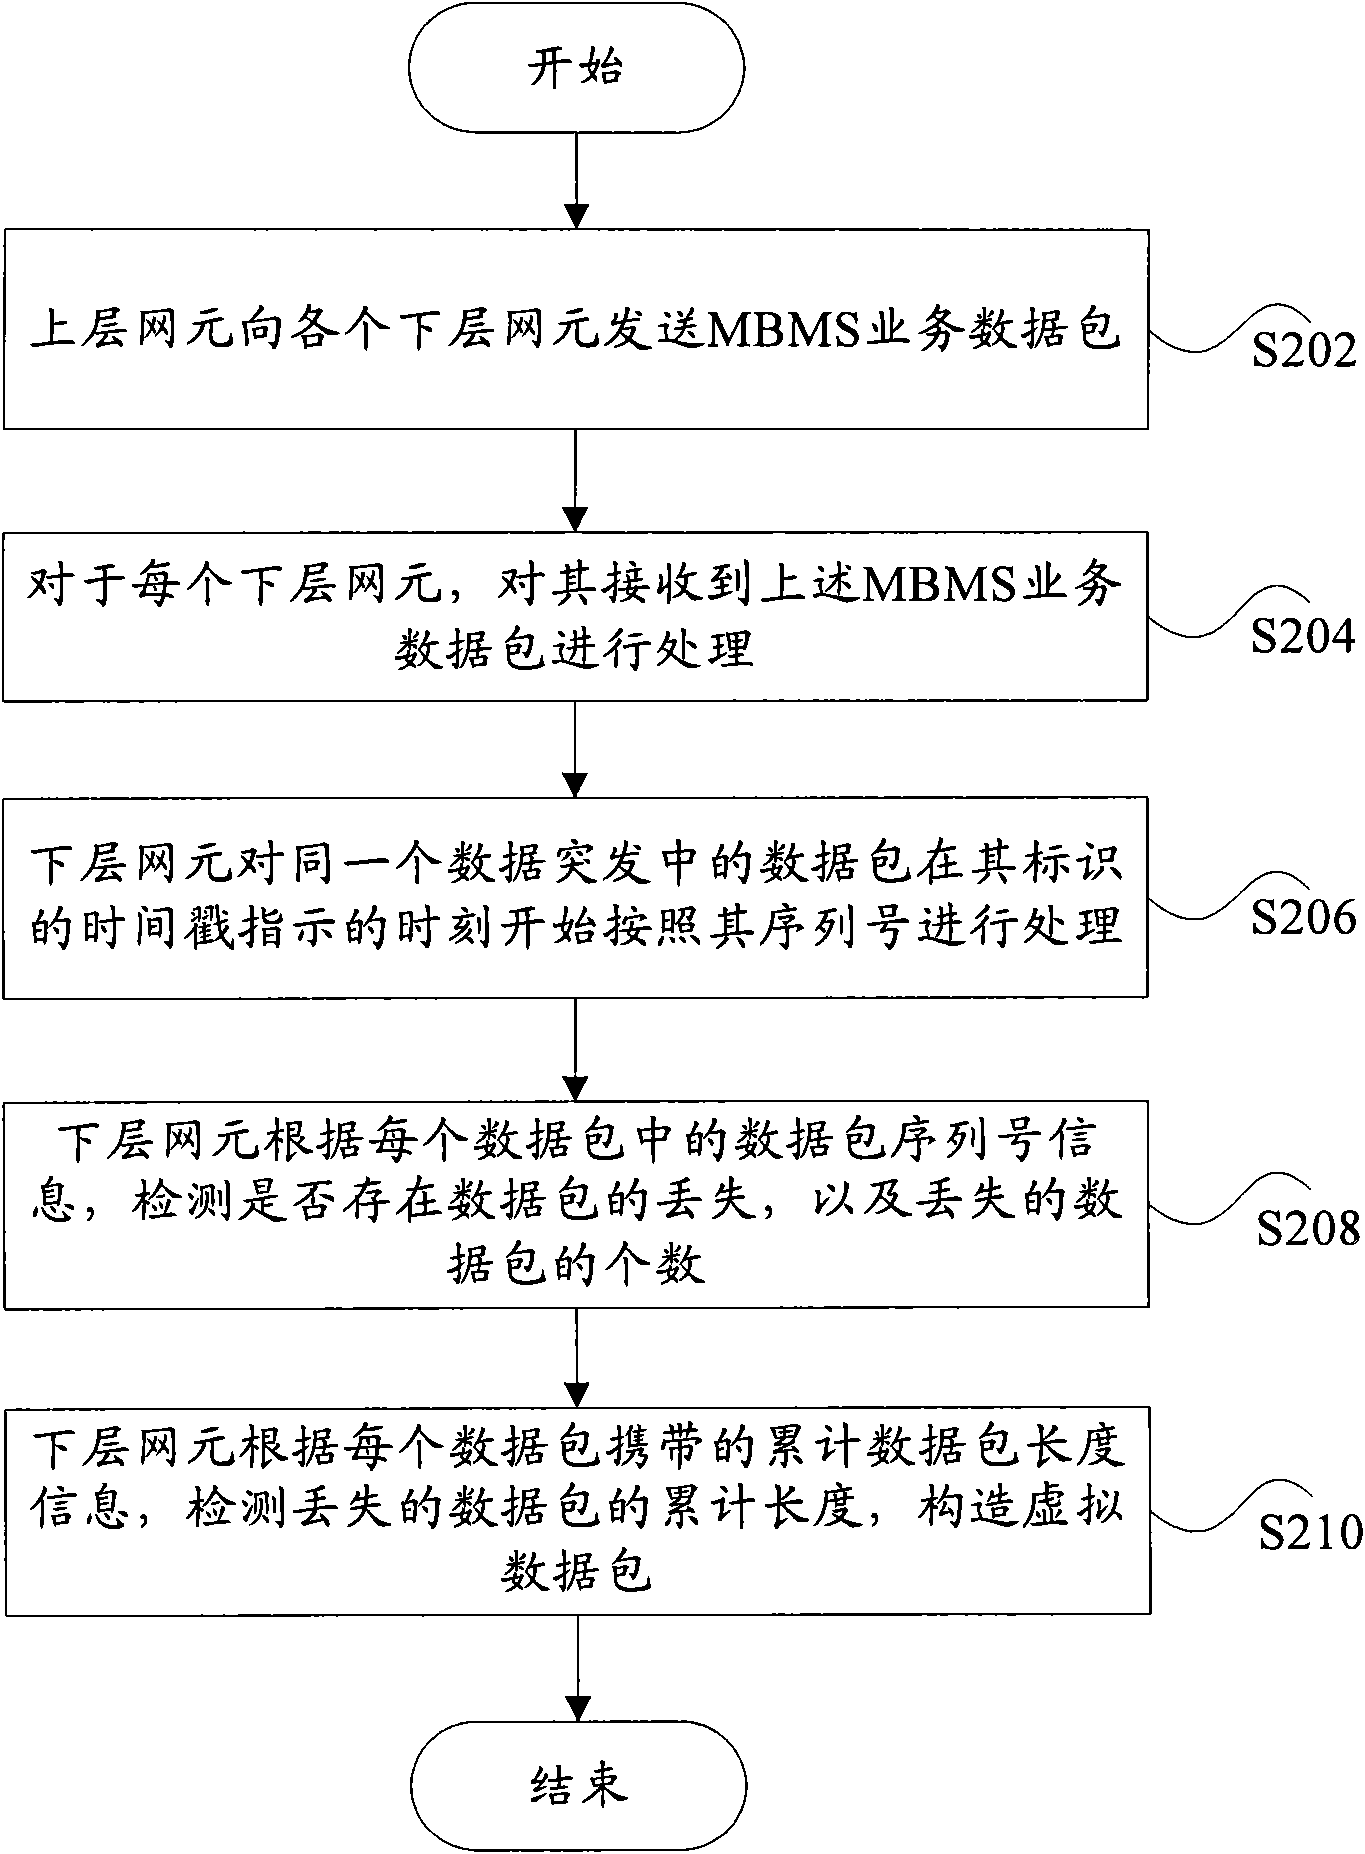 Method and system for transmitting and receiving data